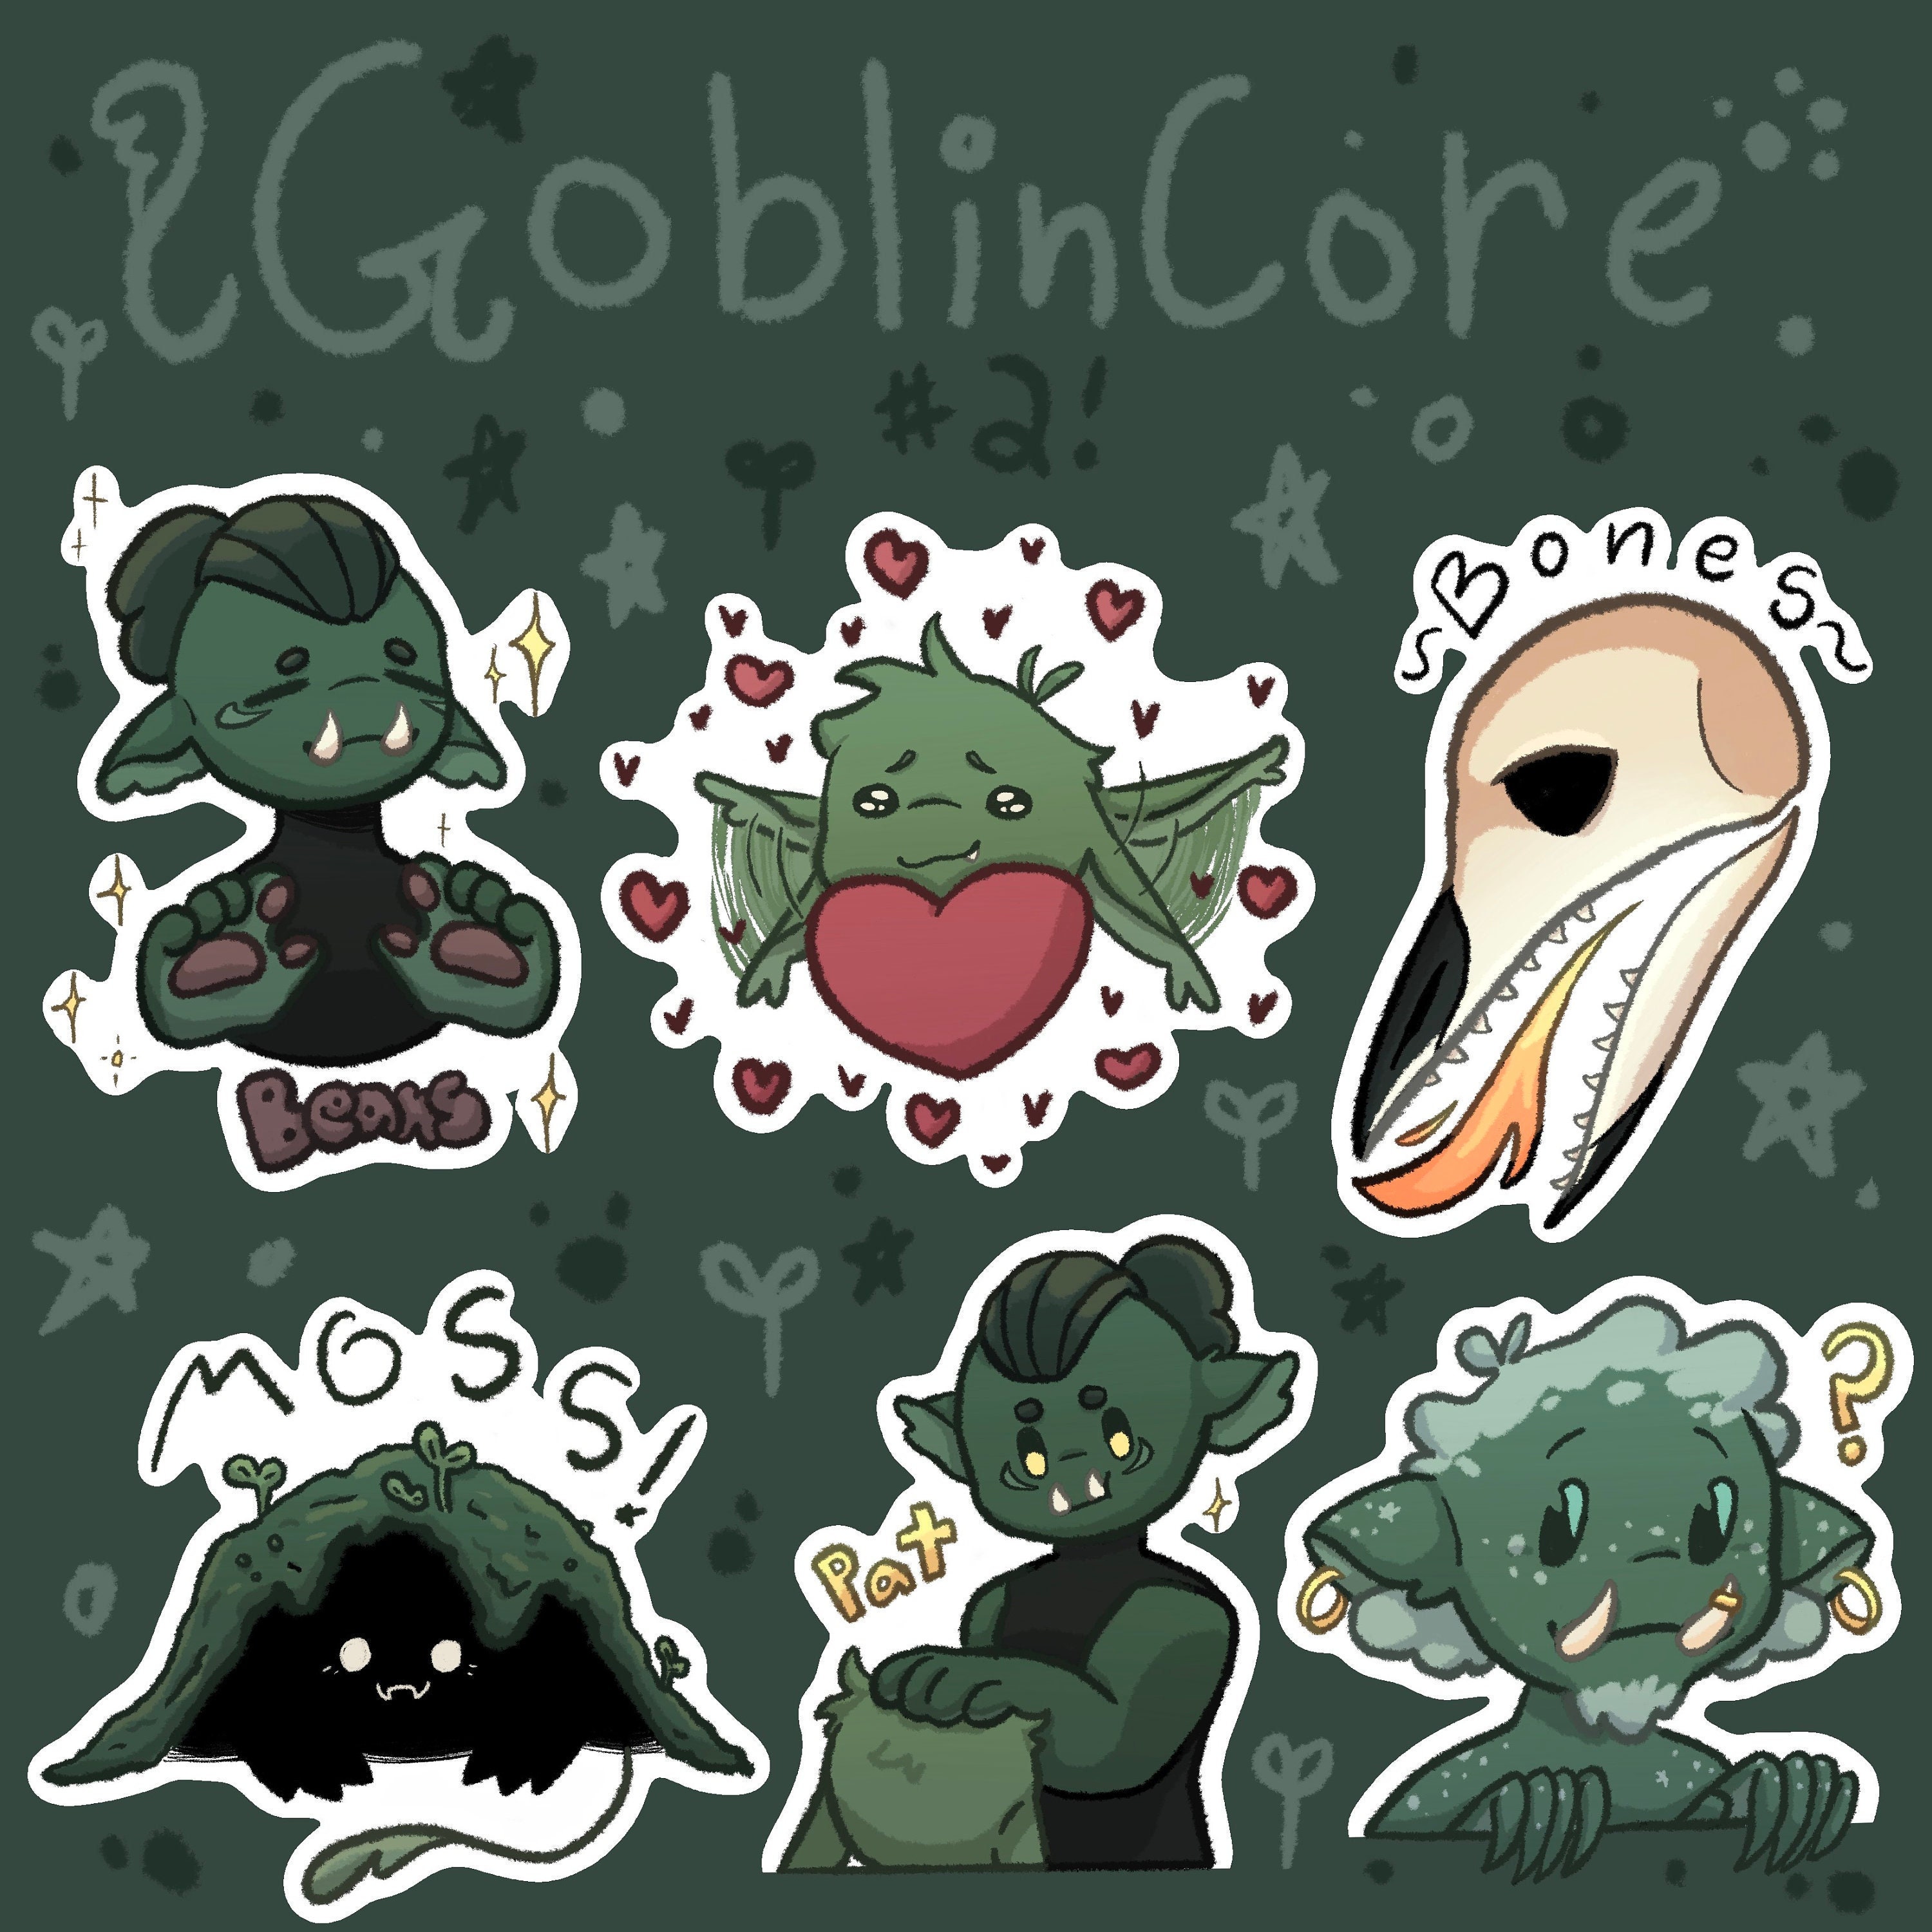 Cottagecore Stickers, Goblincore Sticker, Aesthetic Cottagecore Stickers,  Fairycore Stickers, Toad Sticker, Whitchy Stickers, Scrapbooking 